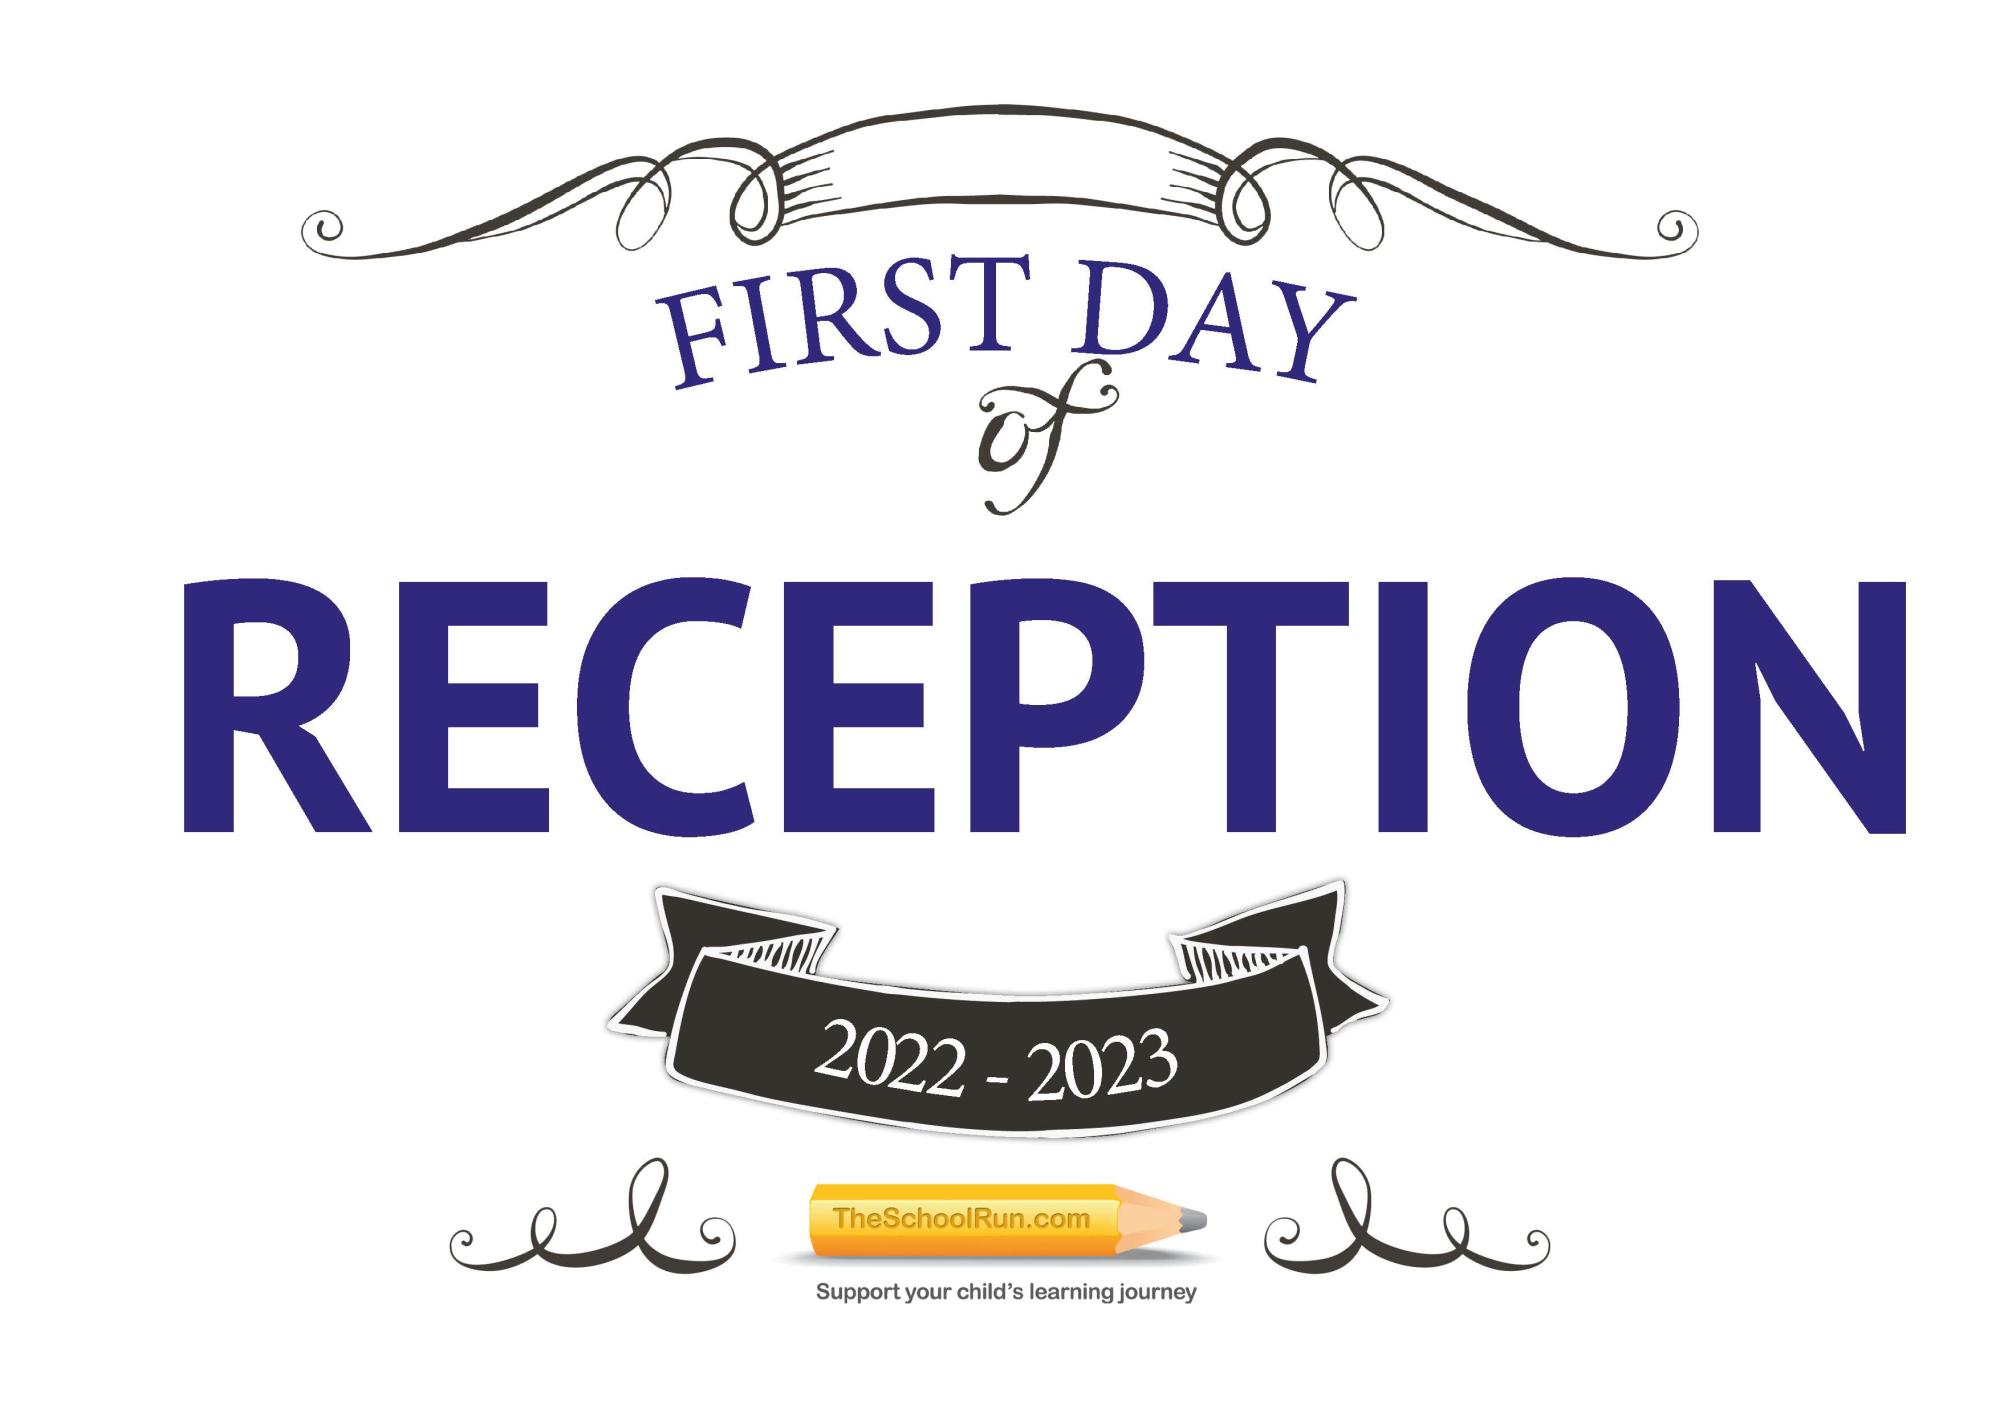 First day of Reception